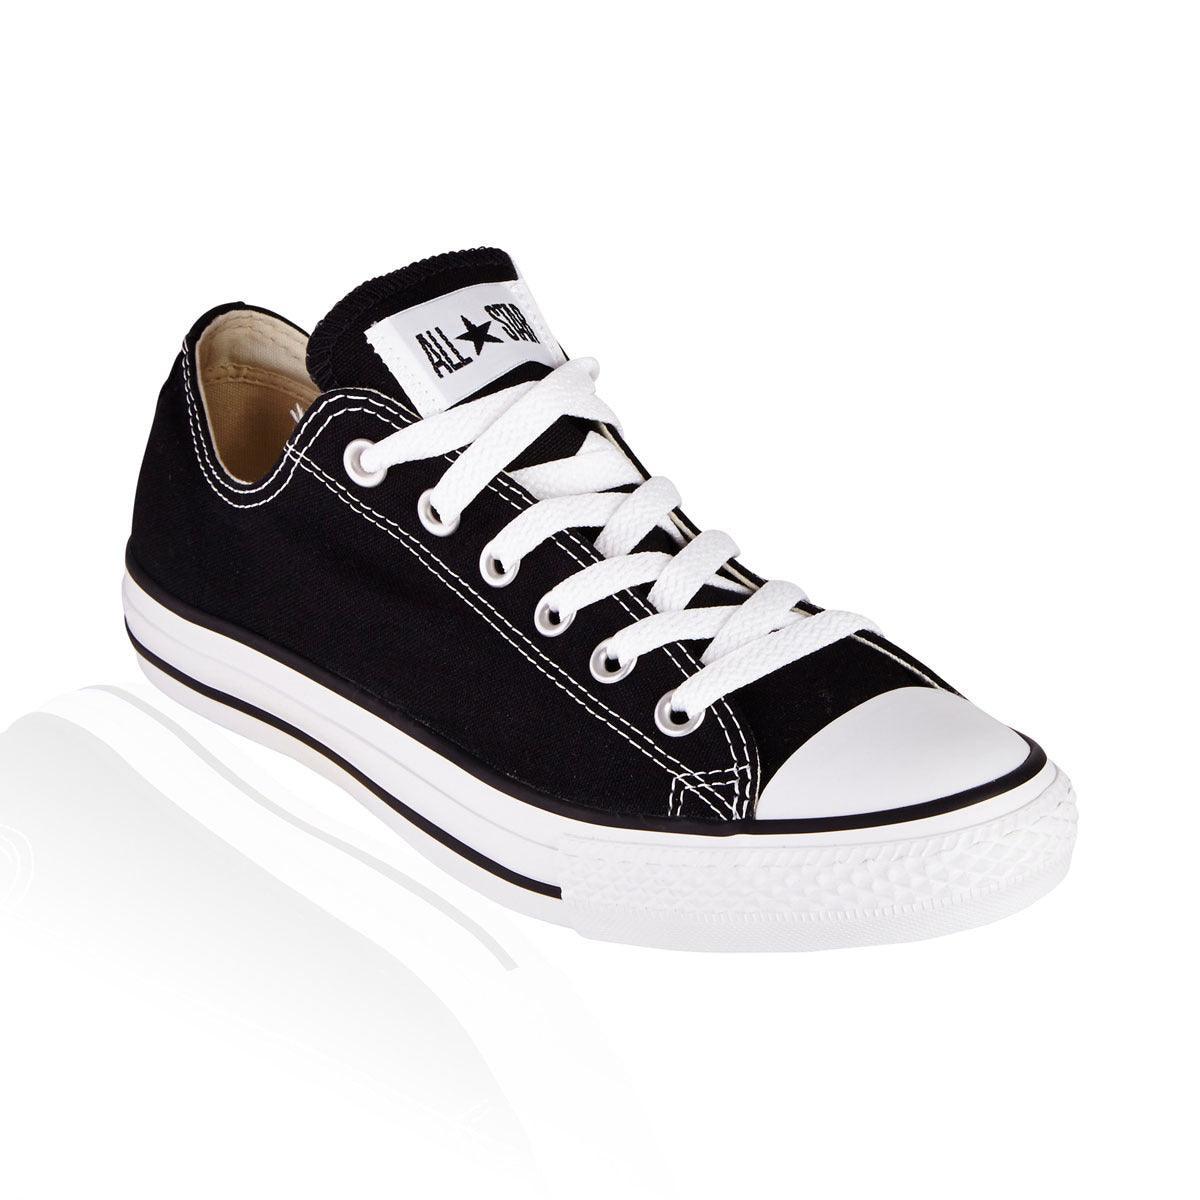 Shop Converse Shoes | Chuck Taylor All Star Low - Black/White | The Next Pair